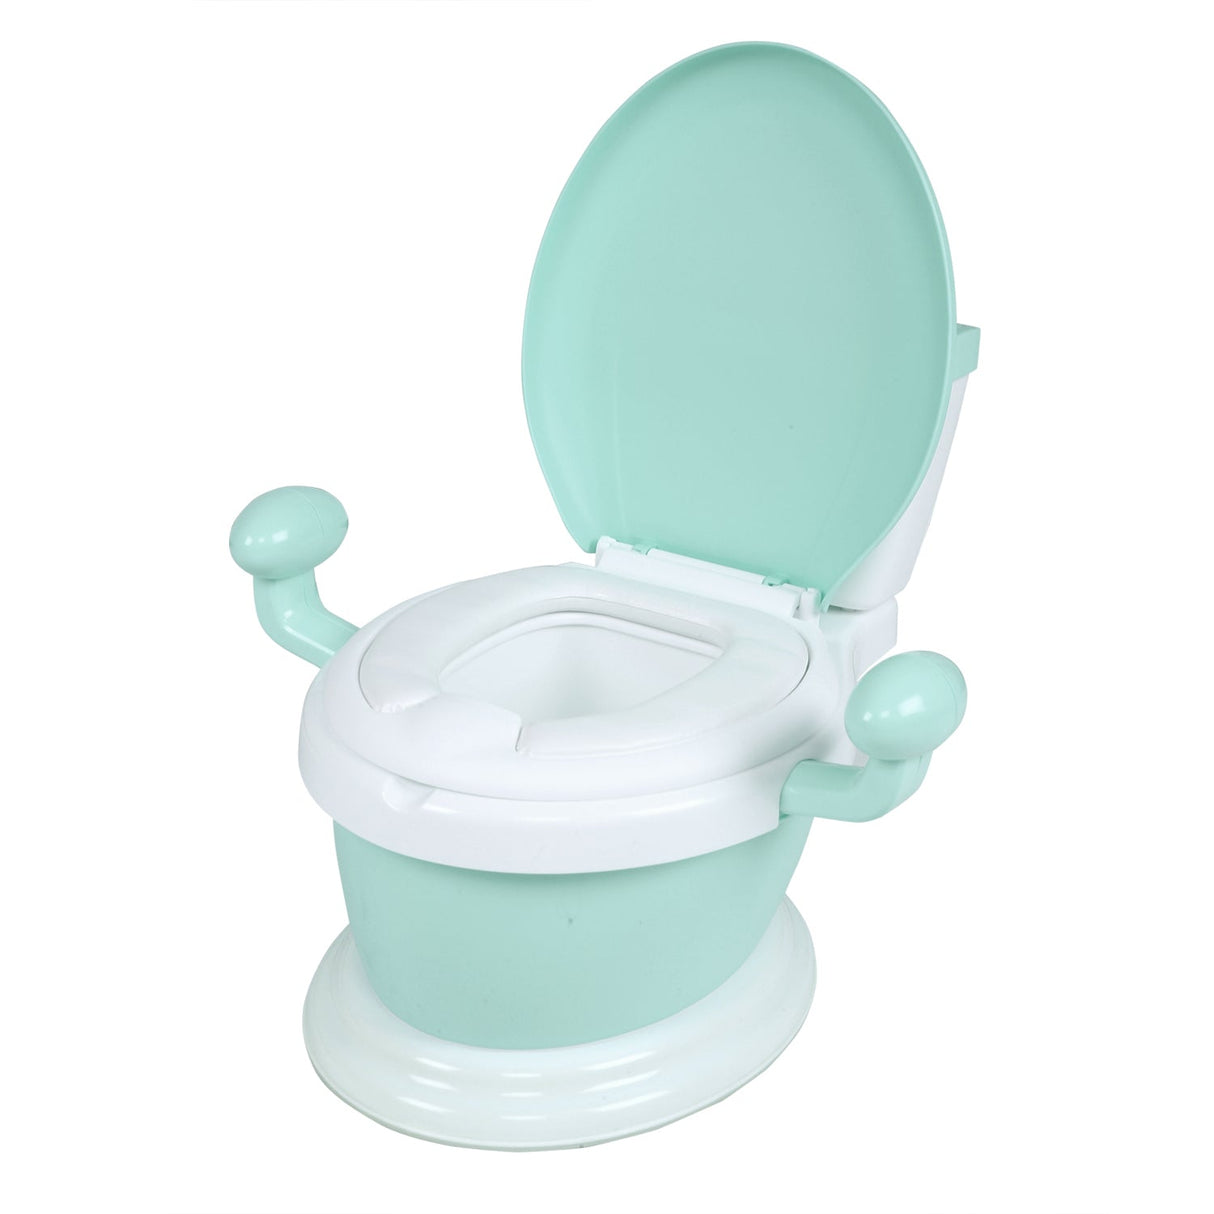 Potty Chair With a Comfortable Seat Handles For Support